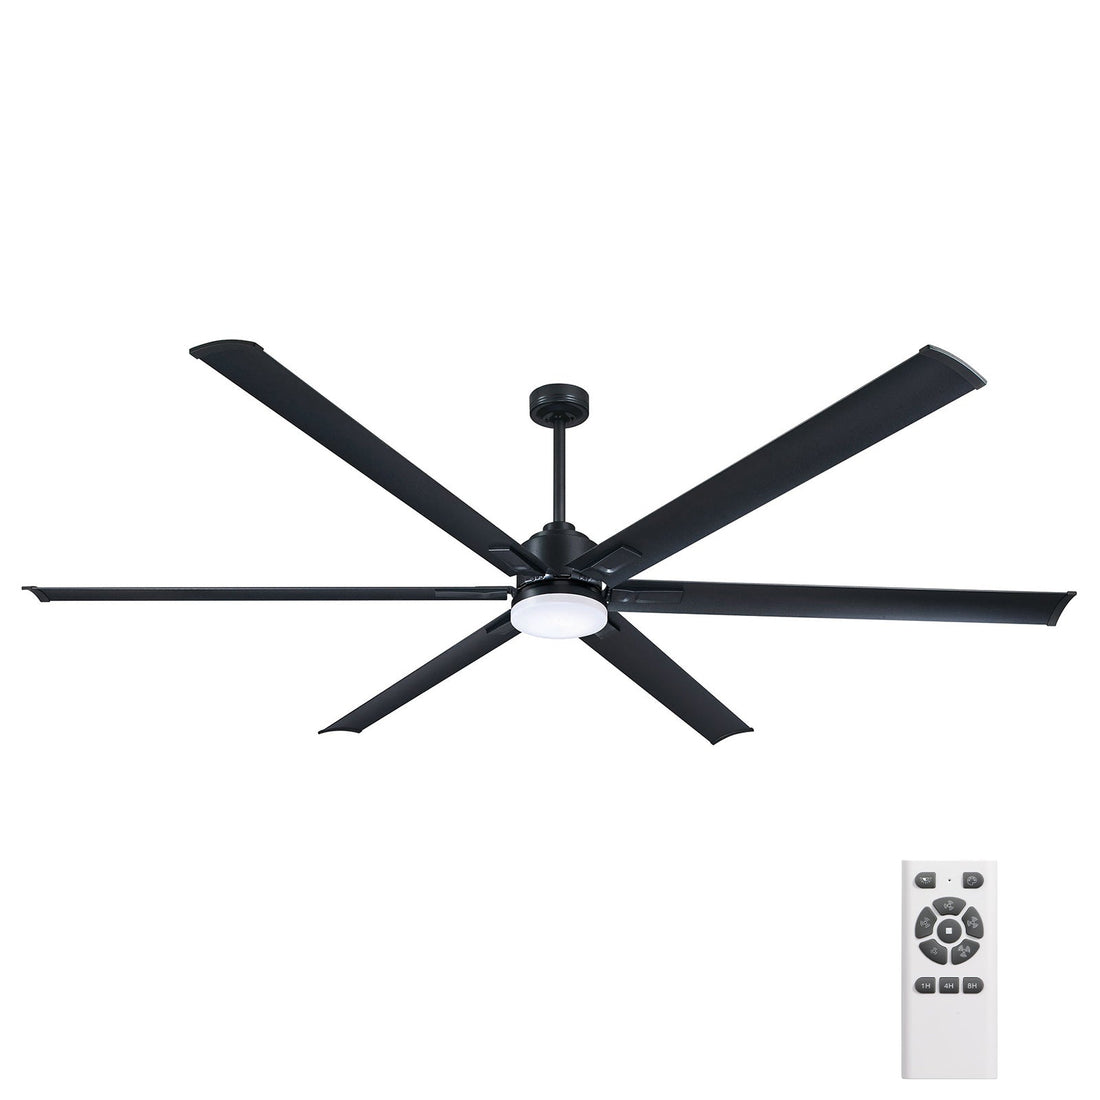 Rhino 2.1m DC Ceiling Fan with LED Light and Remote Mercator